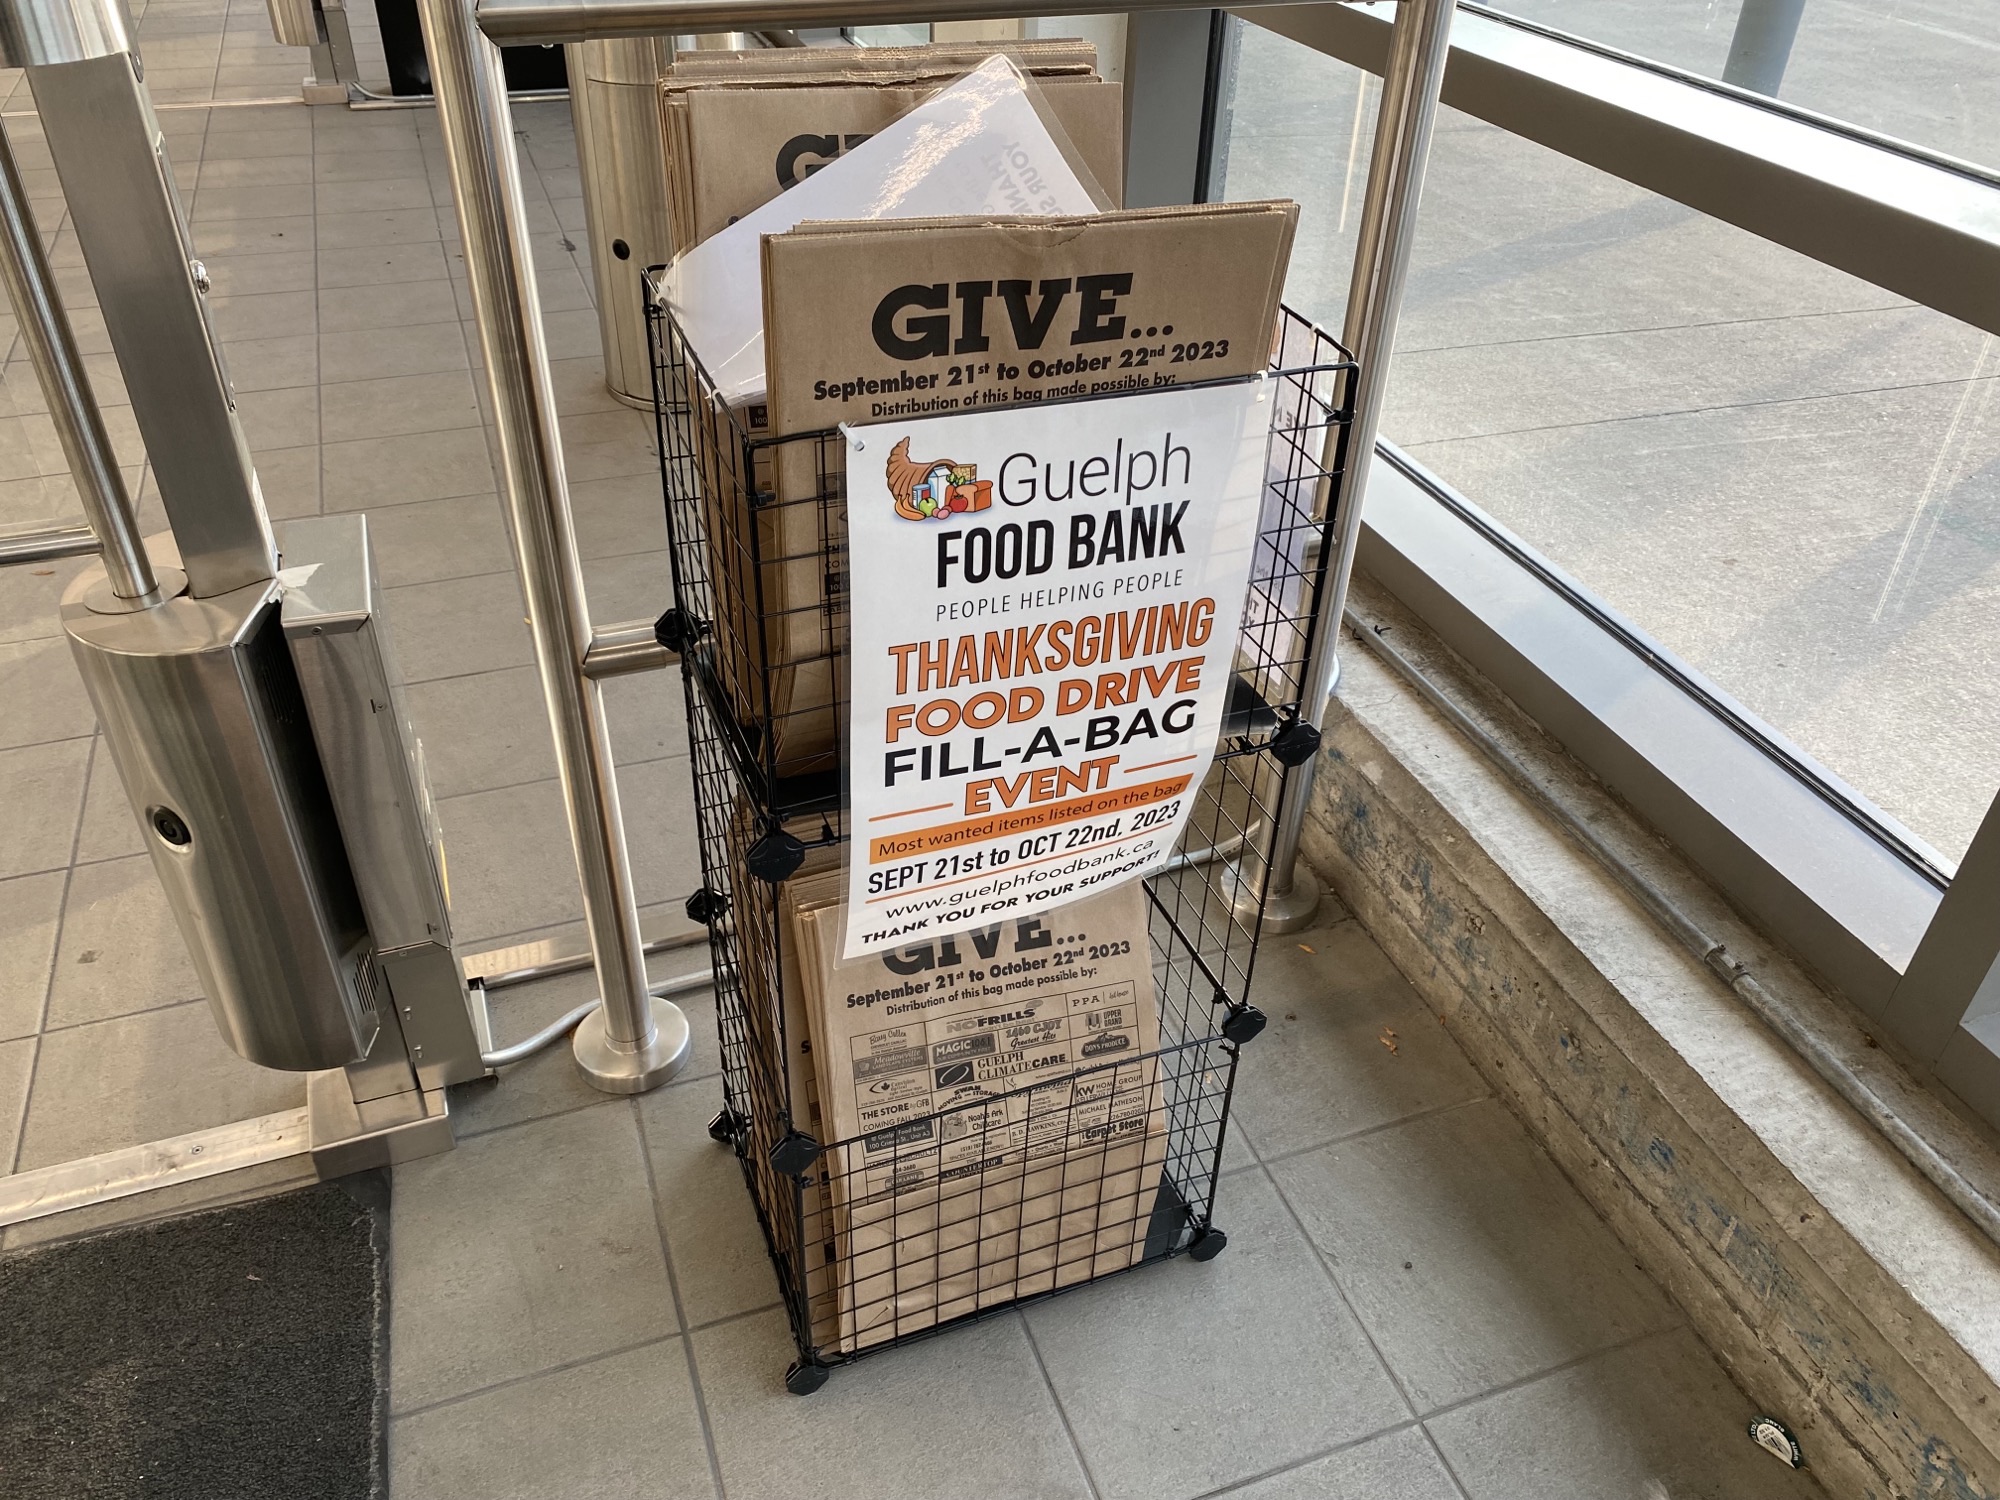 Guelph food bank extends Thanksgiving food drive